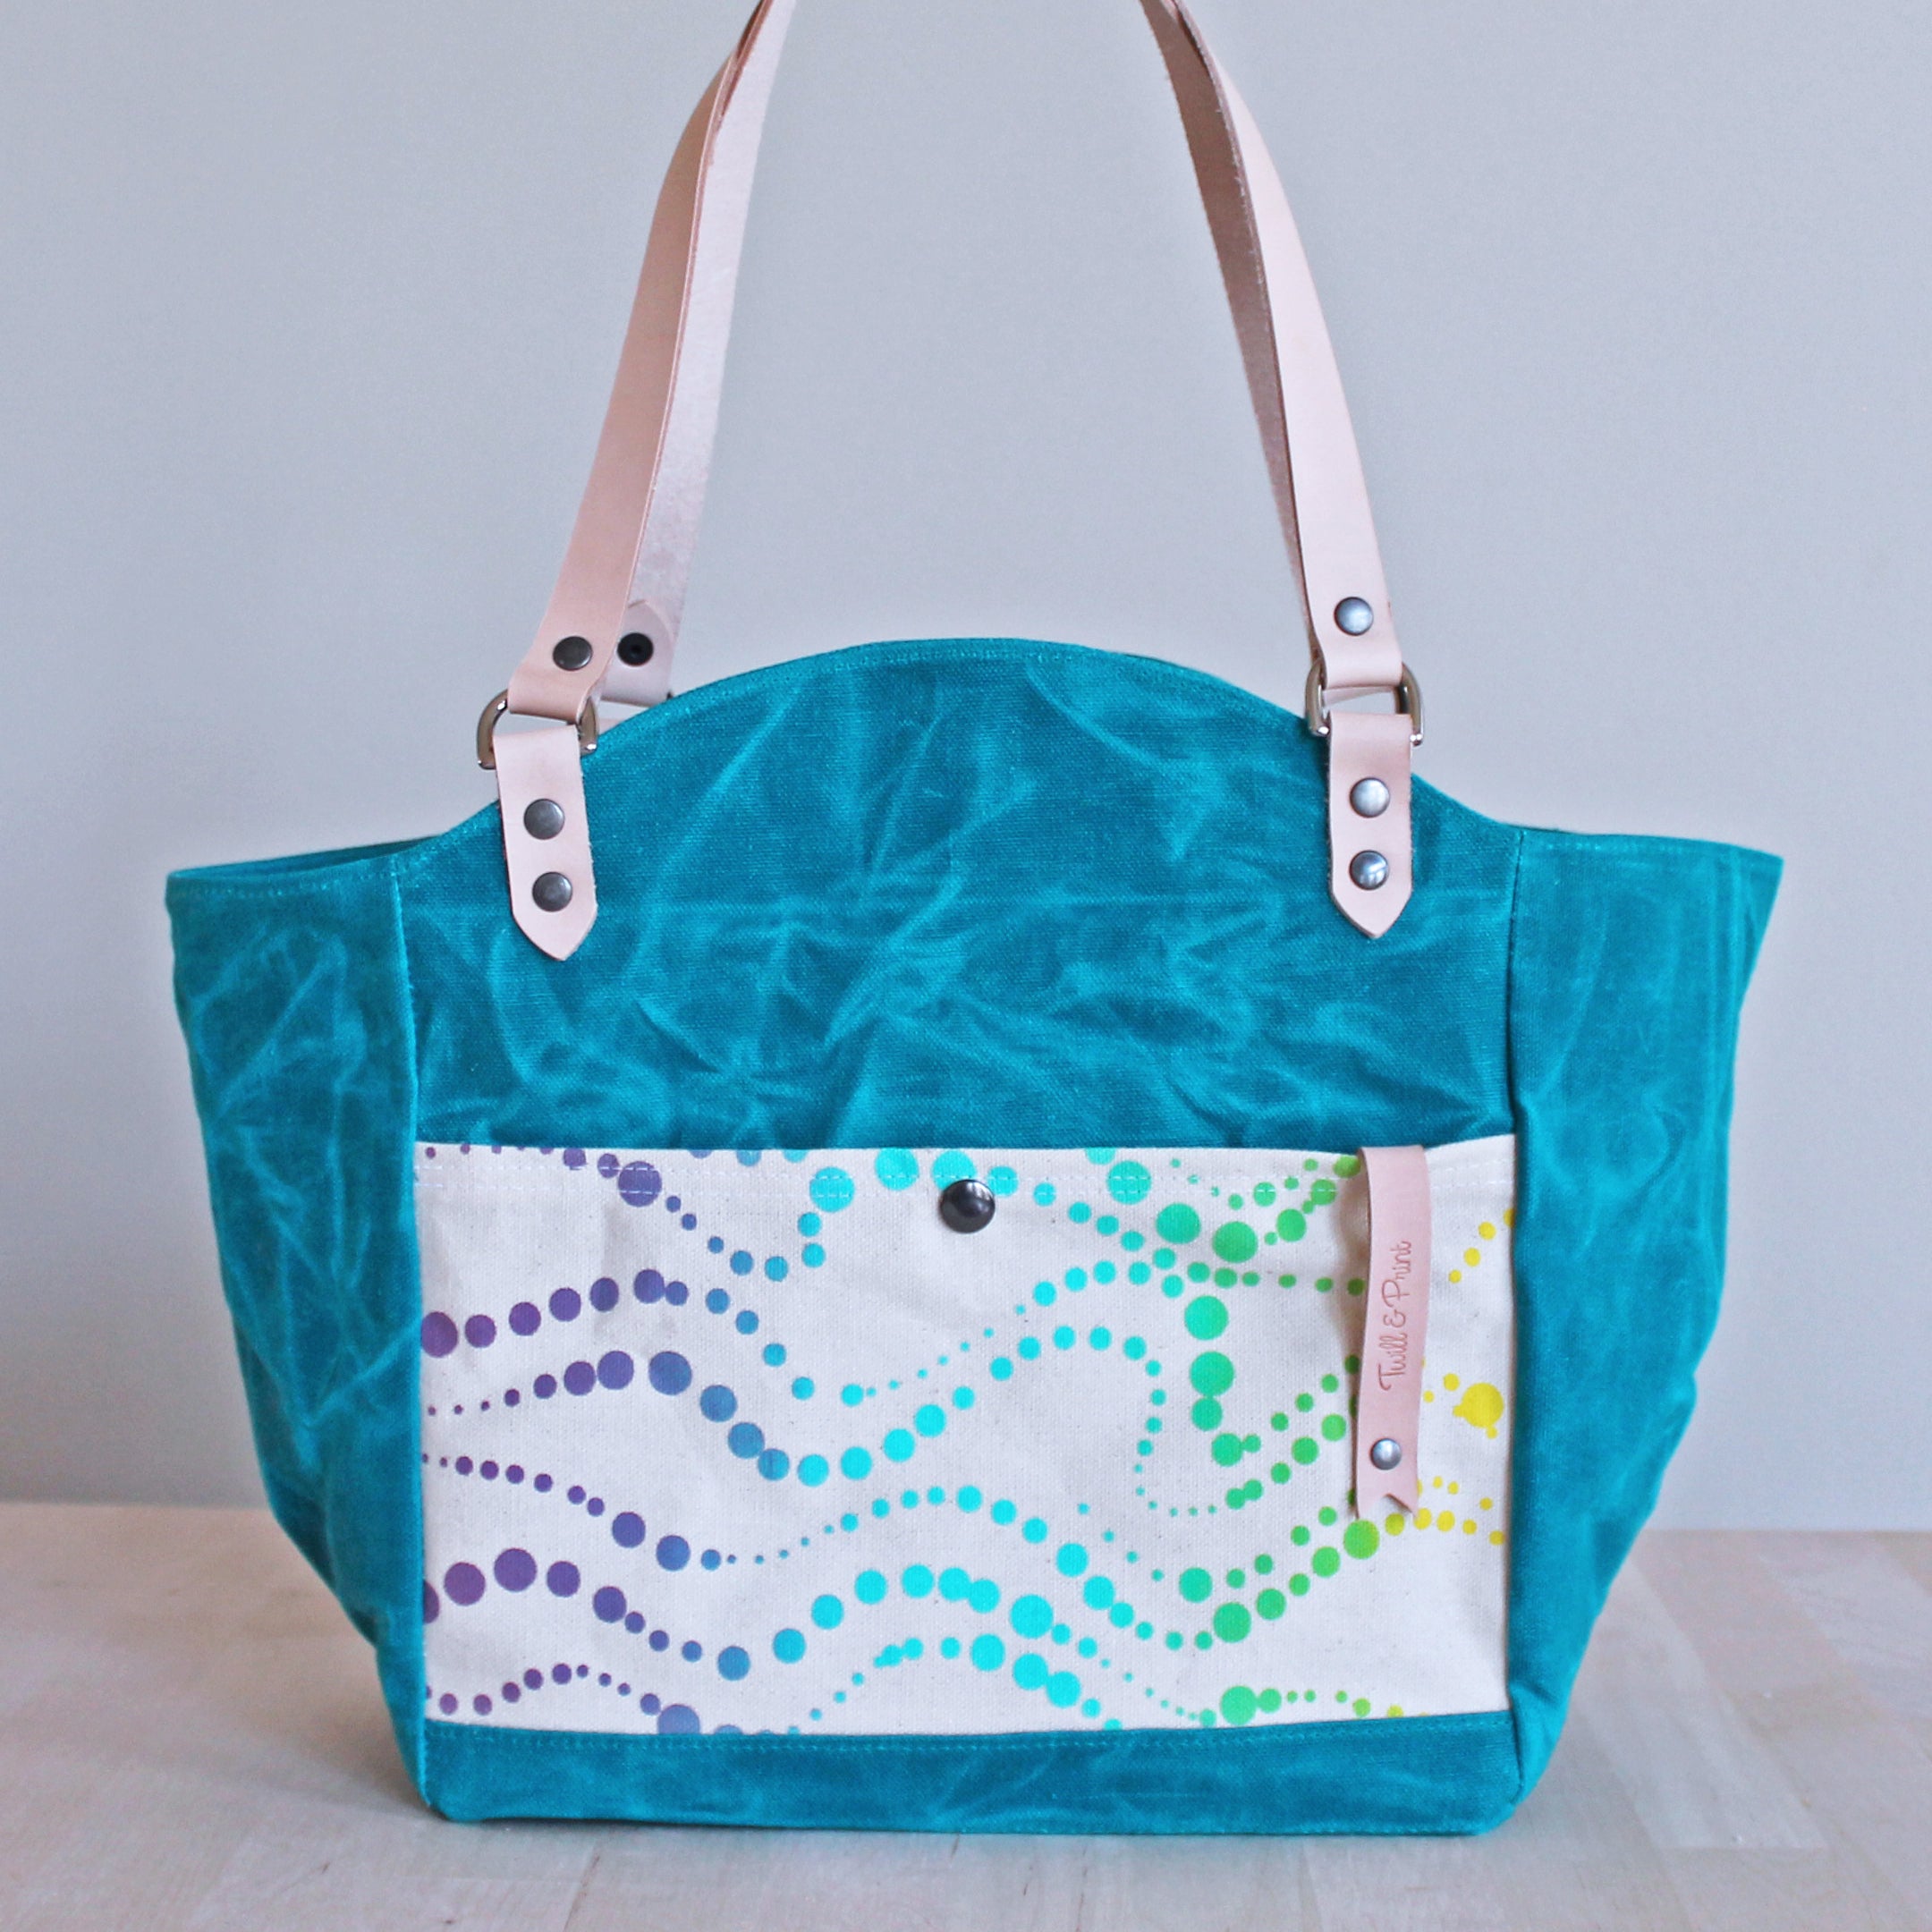 Special Edition Prints - Abettor Tote Bag (2 Styles)